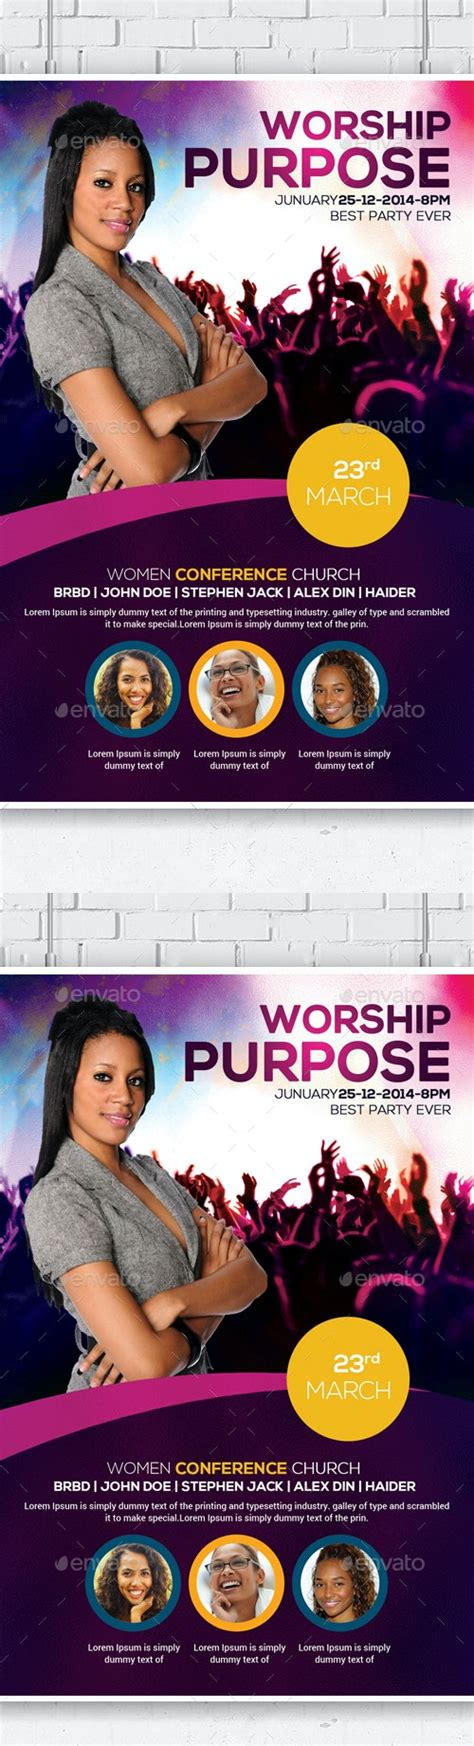 women conference flyer template  anaya graphicriver